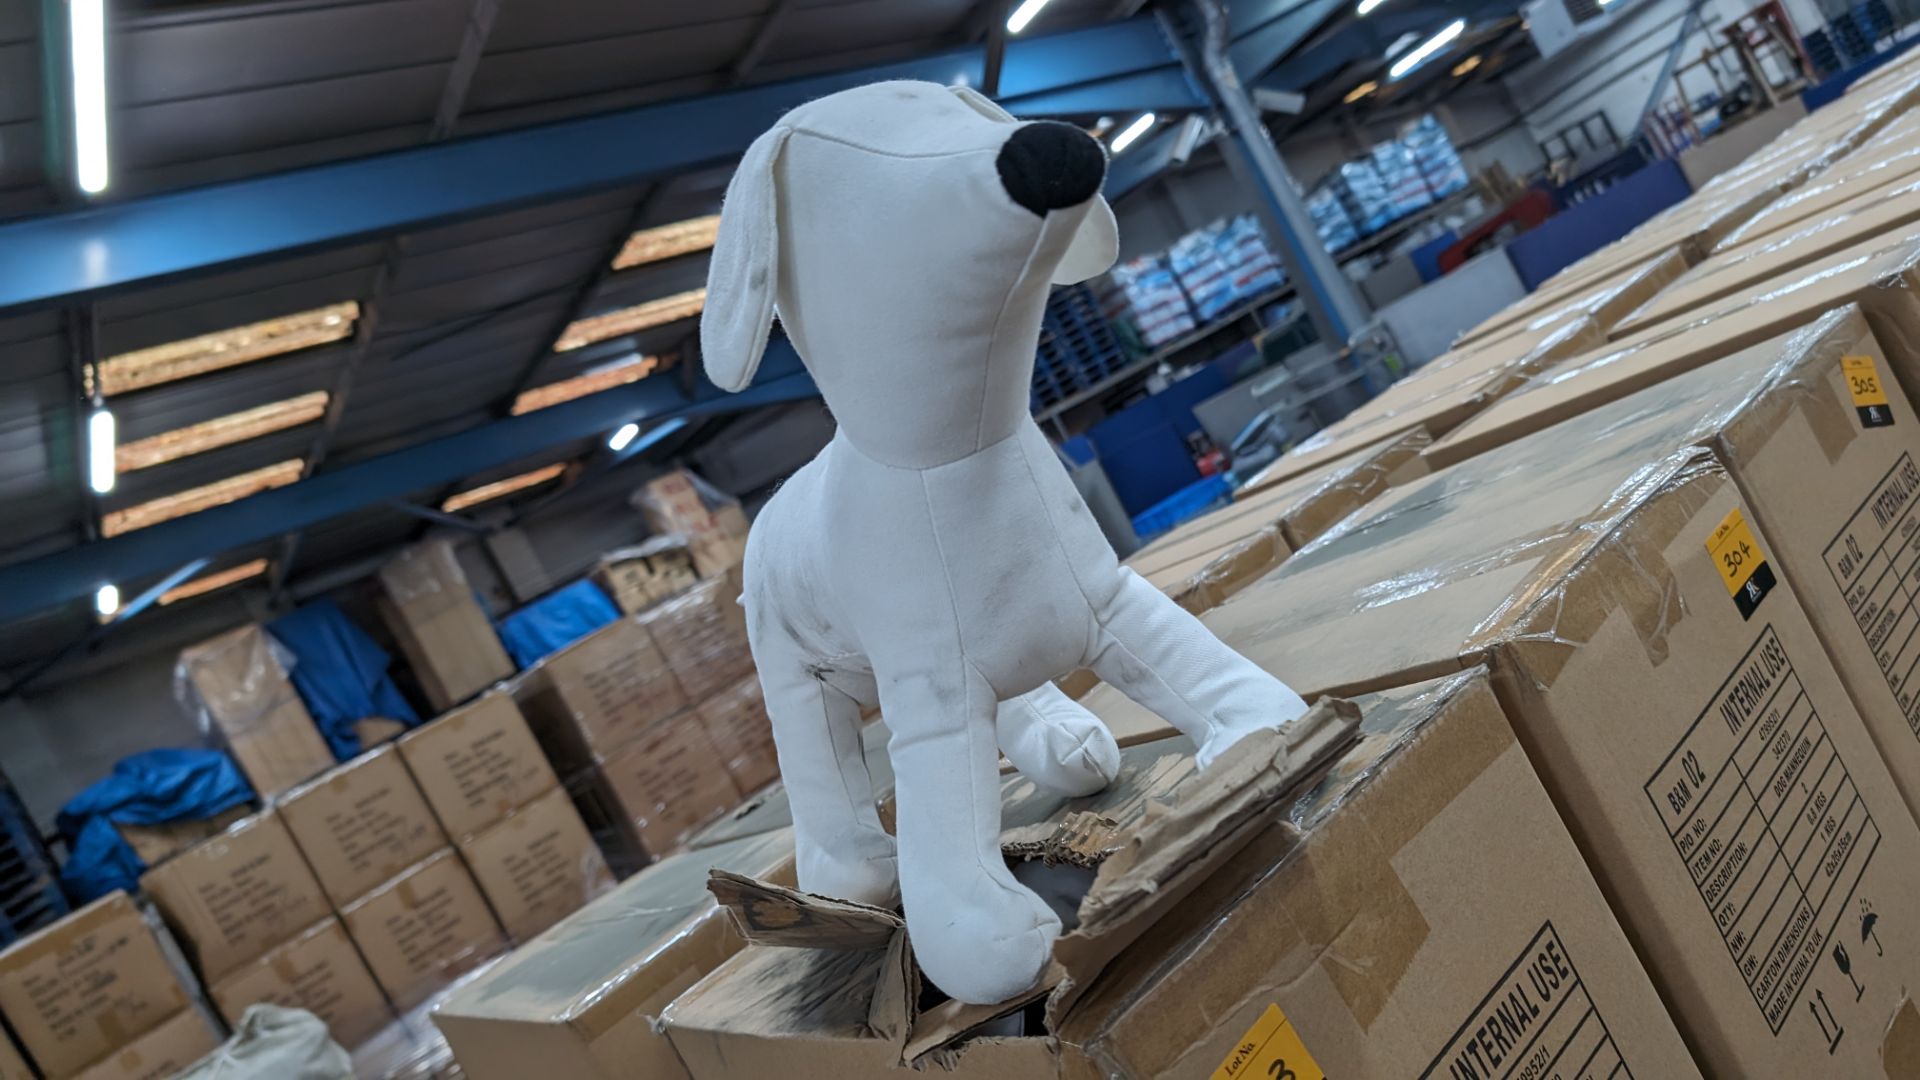 16 off dog mannequins (8 boxes each with 2 mannequins) - Image 3 of 3